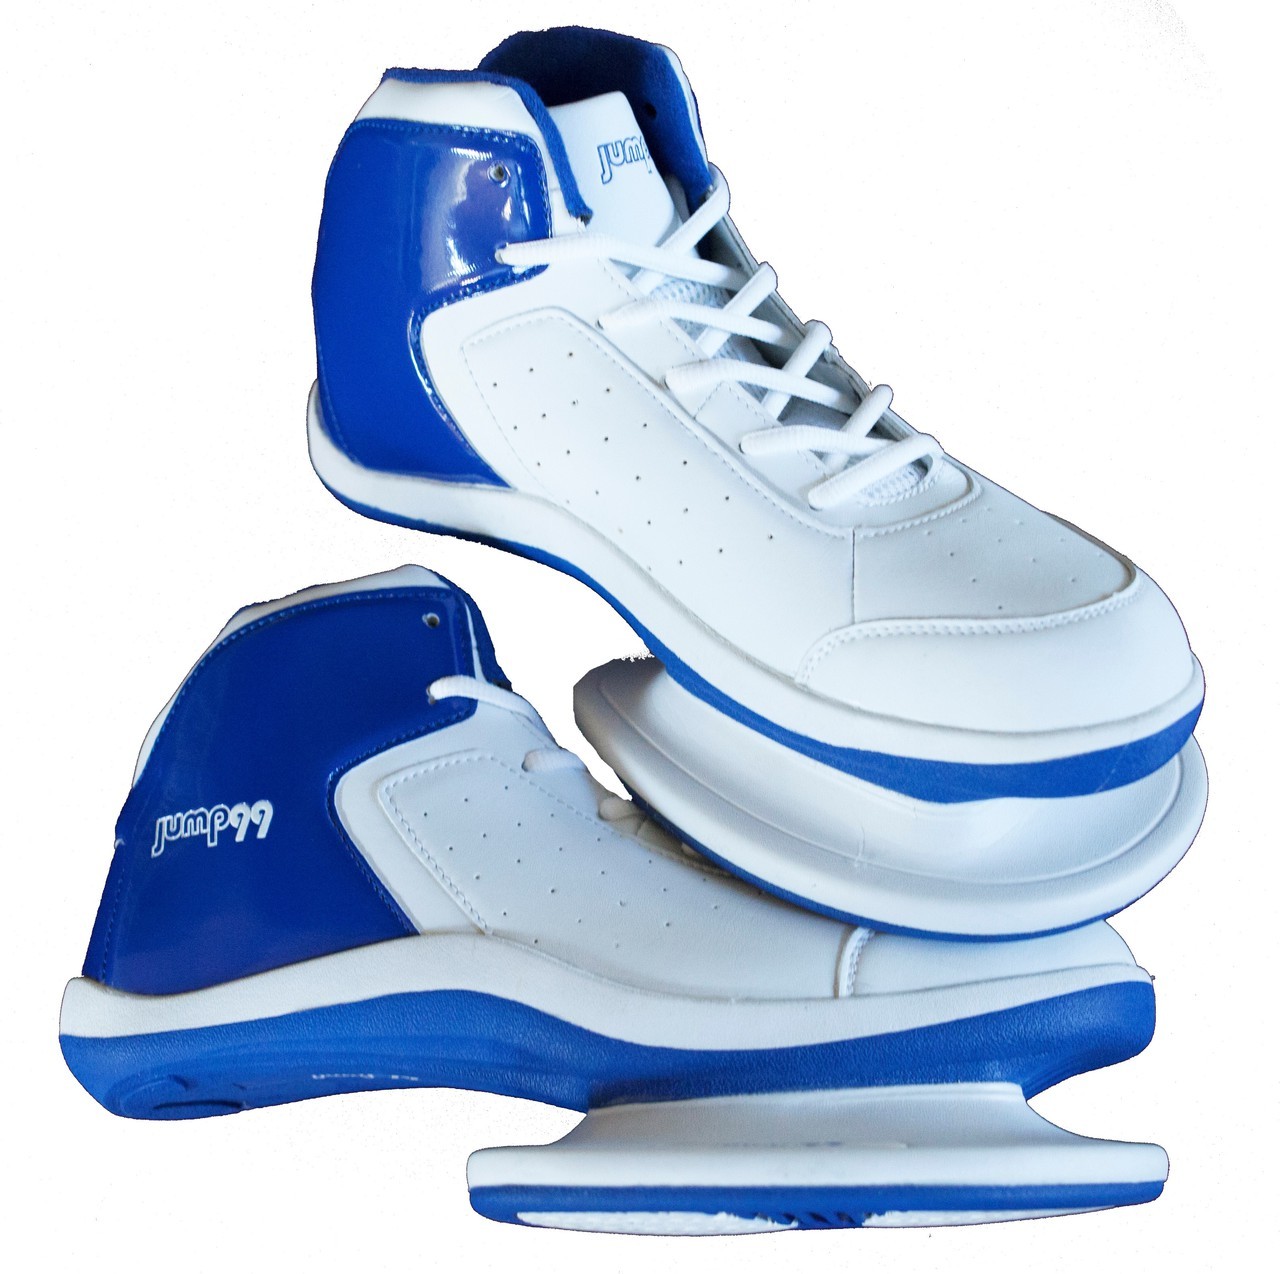 Jump99 Ultra Strength Plyometric Training Shoes with a Platform to Enhance Your Vertical Jump 